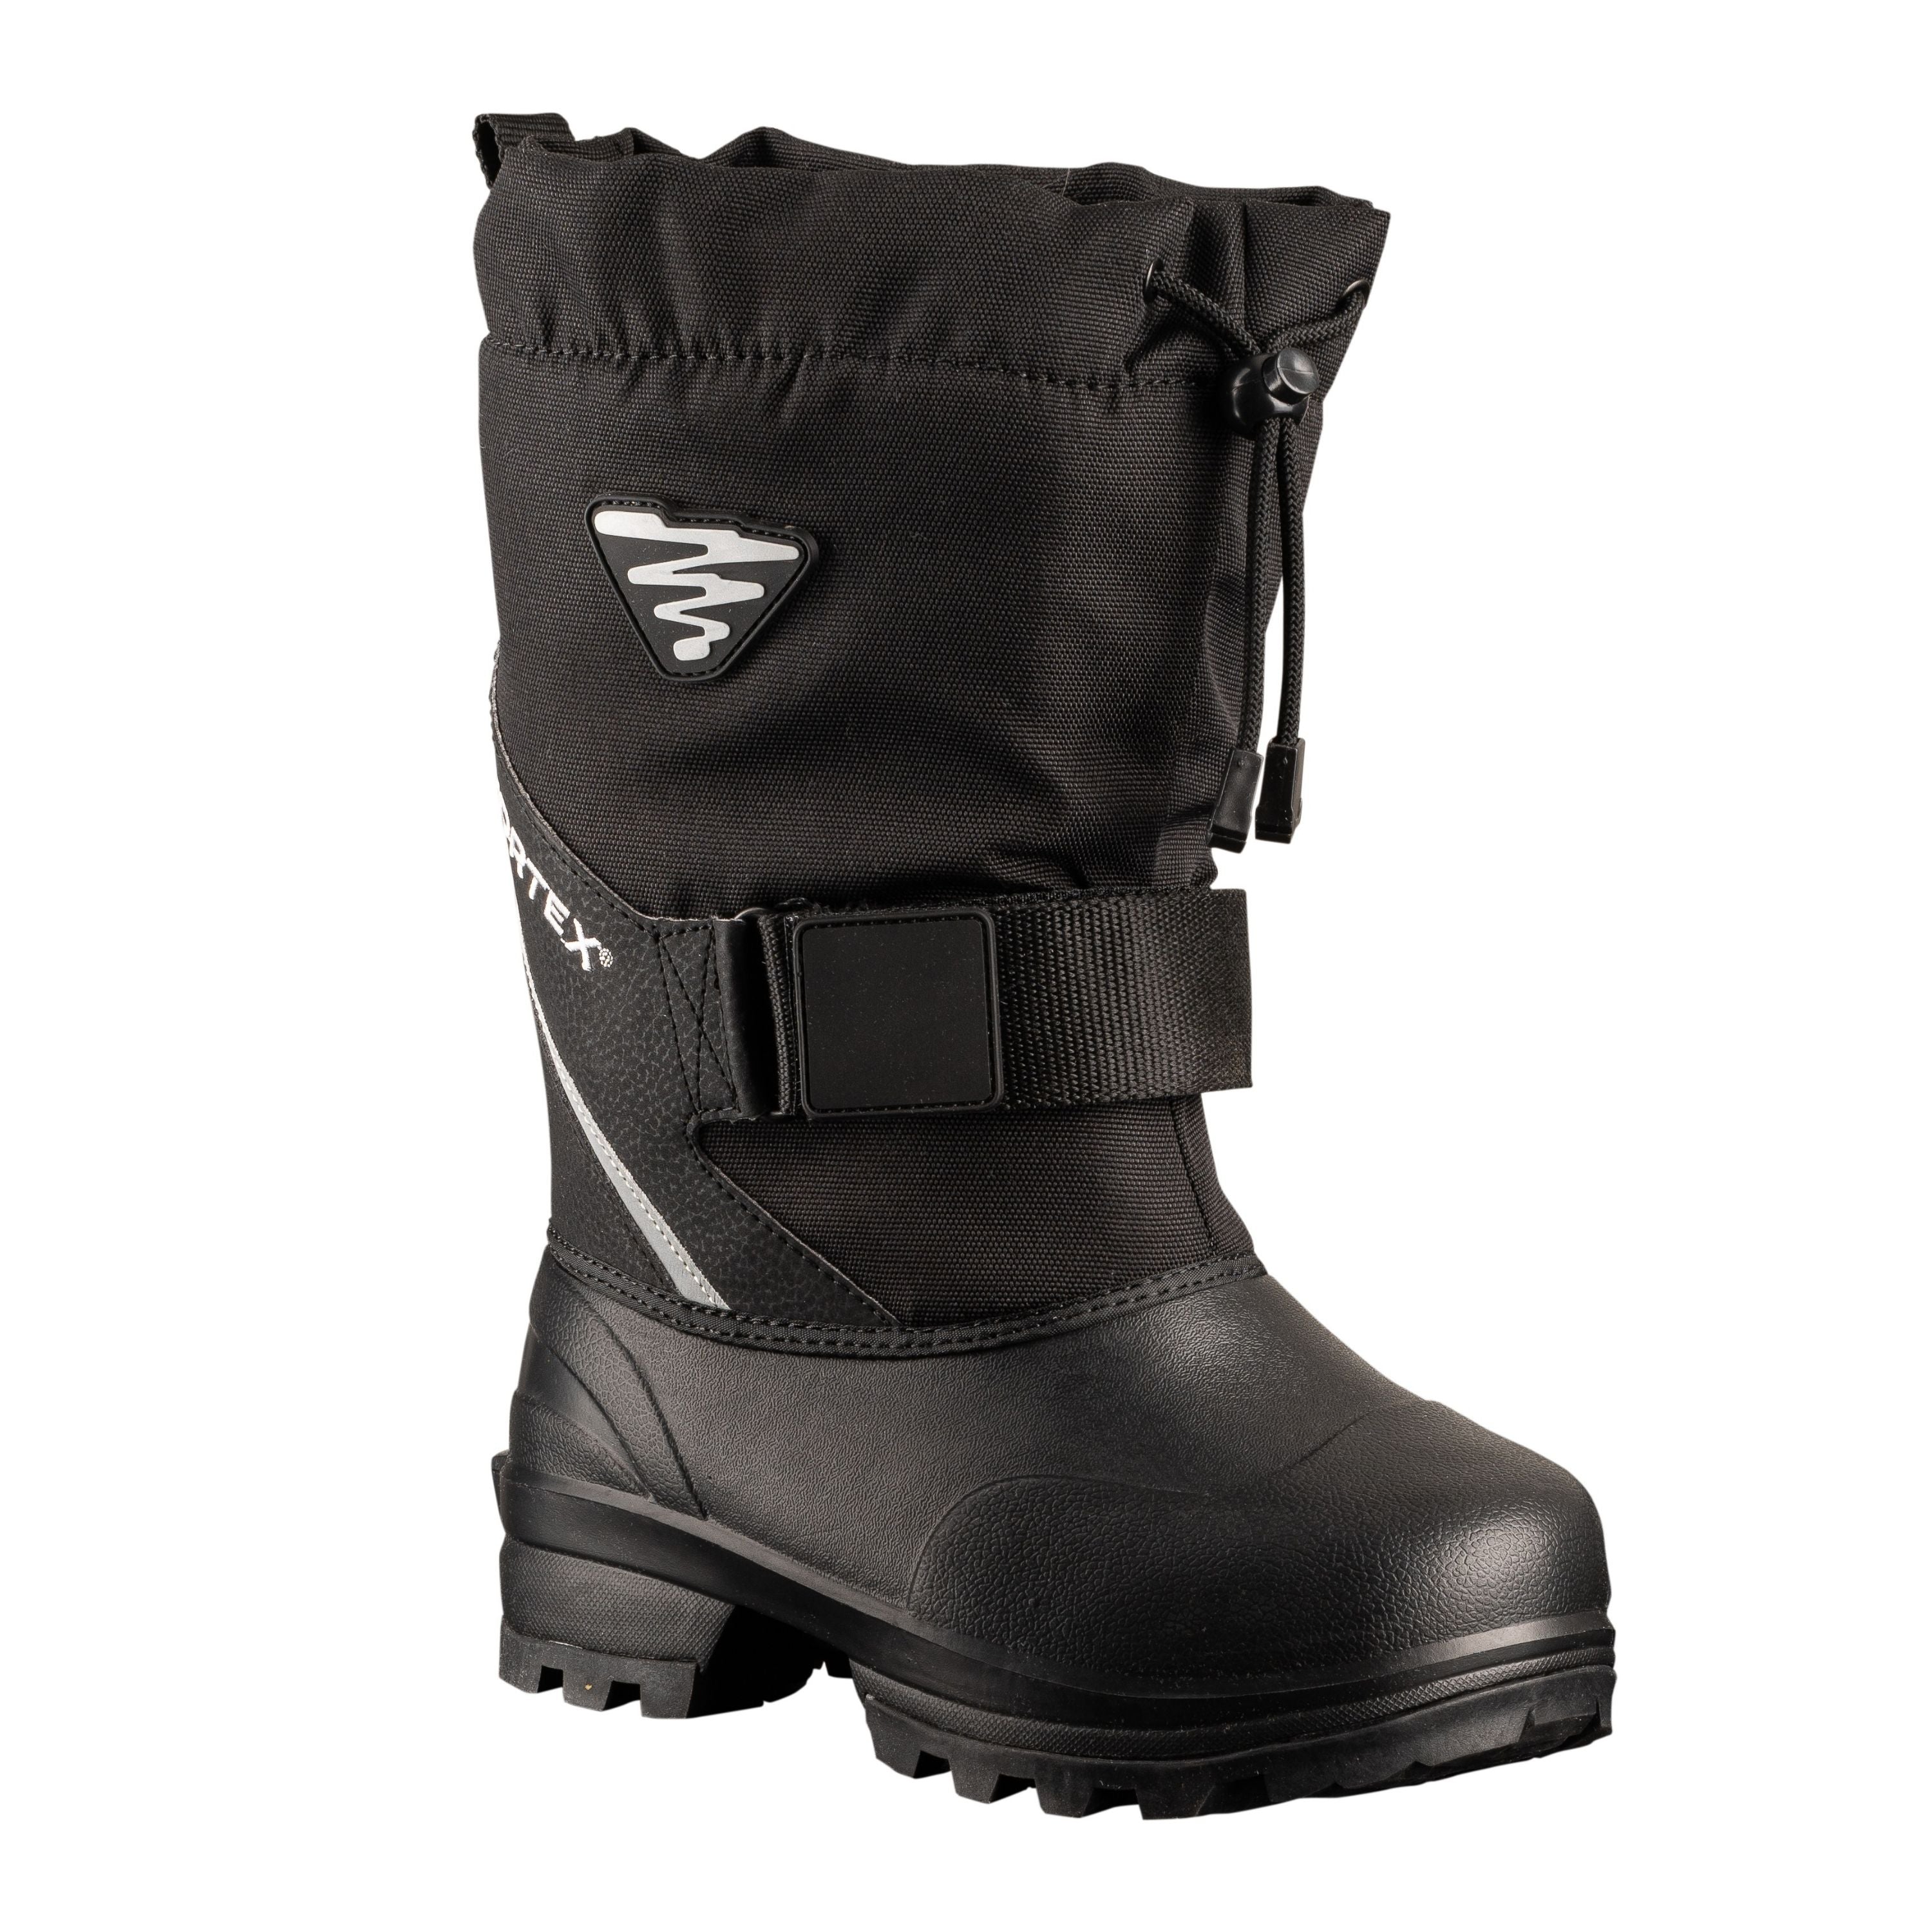 "Storm" Winter boots - Youth's